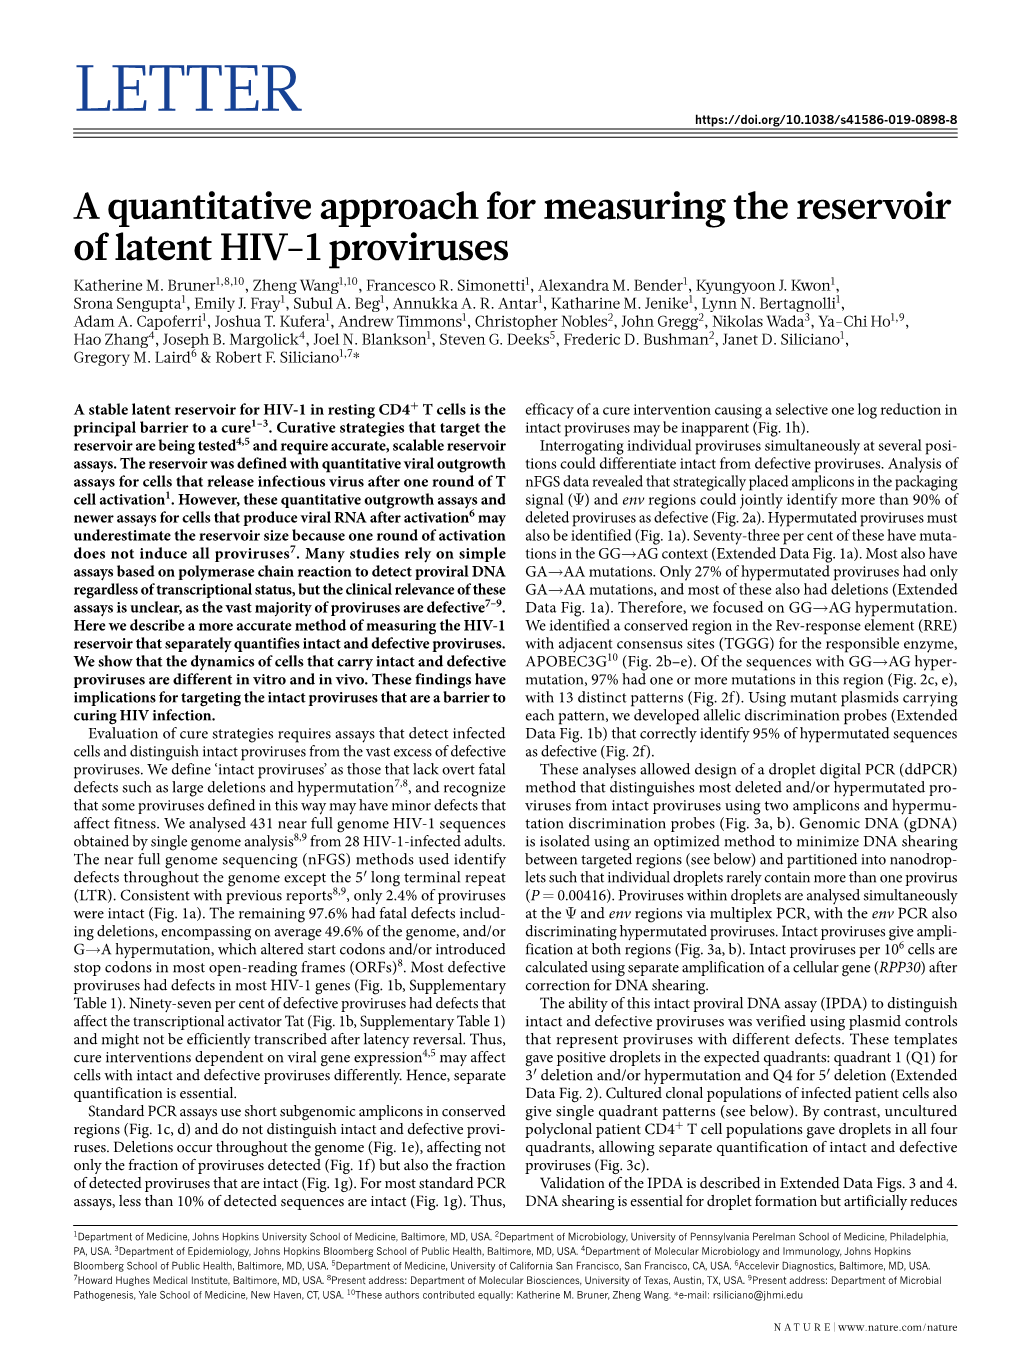 A Quantitative Approach for Measuring the Reservoir of Latent HIV-1 Proviruses Katherine M